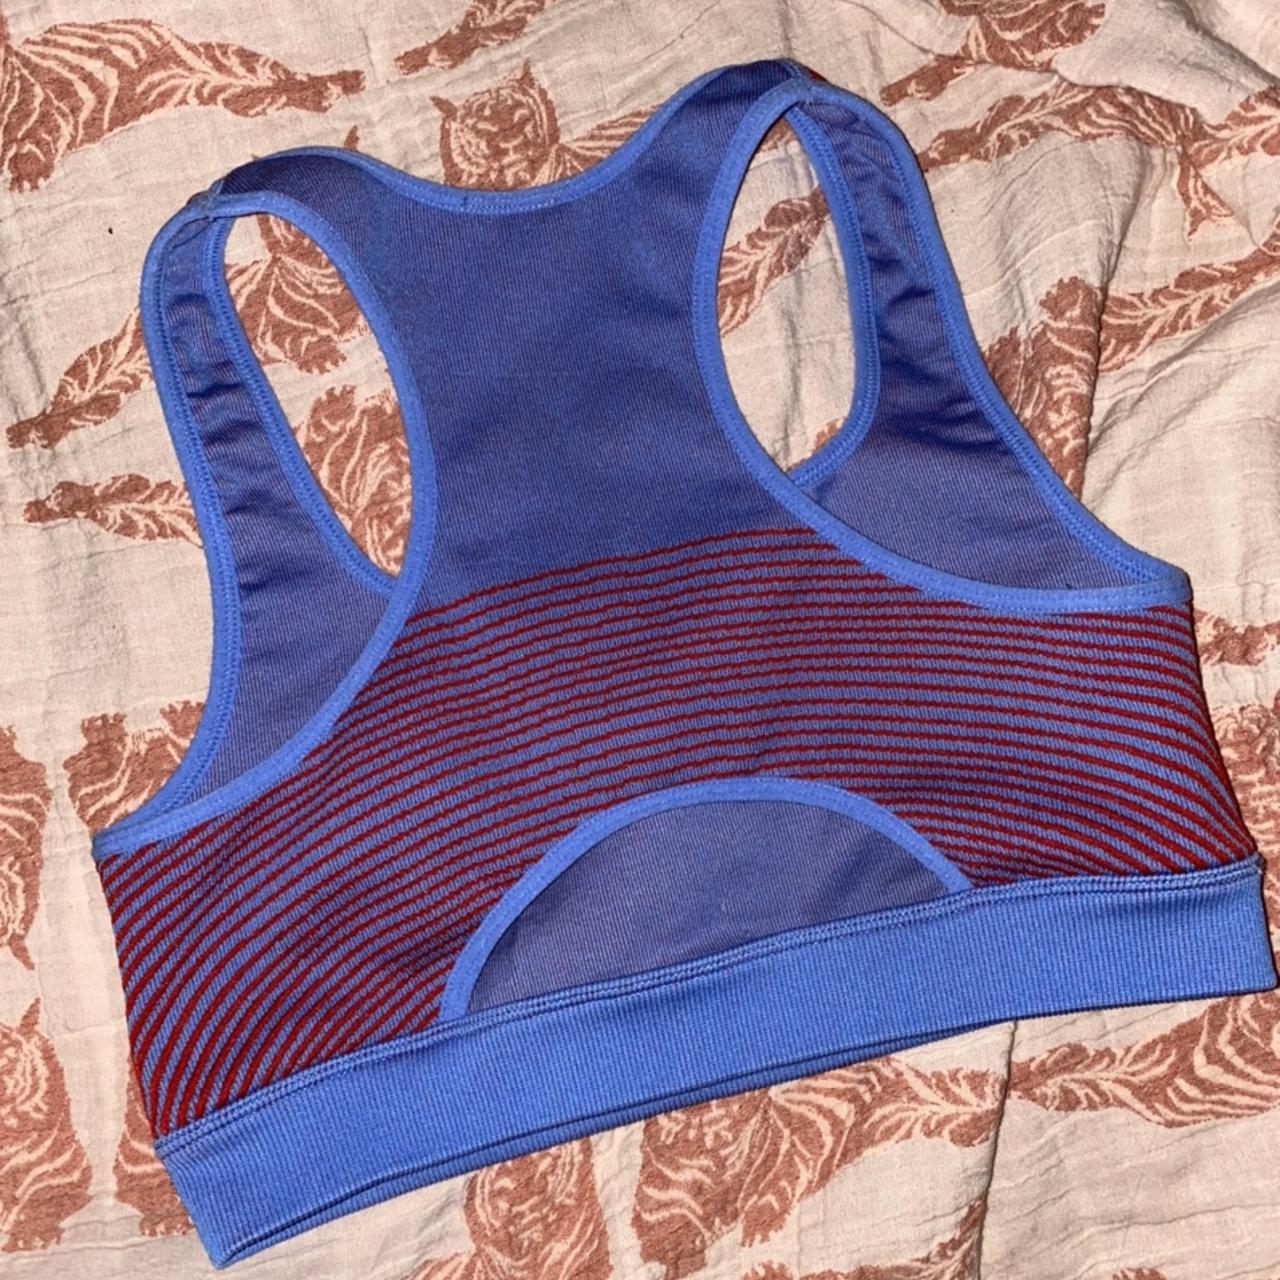 Product Image 2 - ✨Fabletics star sports bra✨

*seamless 

💕Shipping:$5.45💕